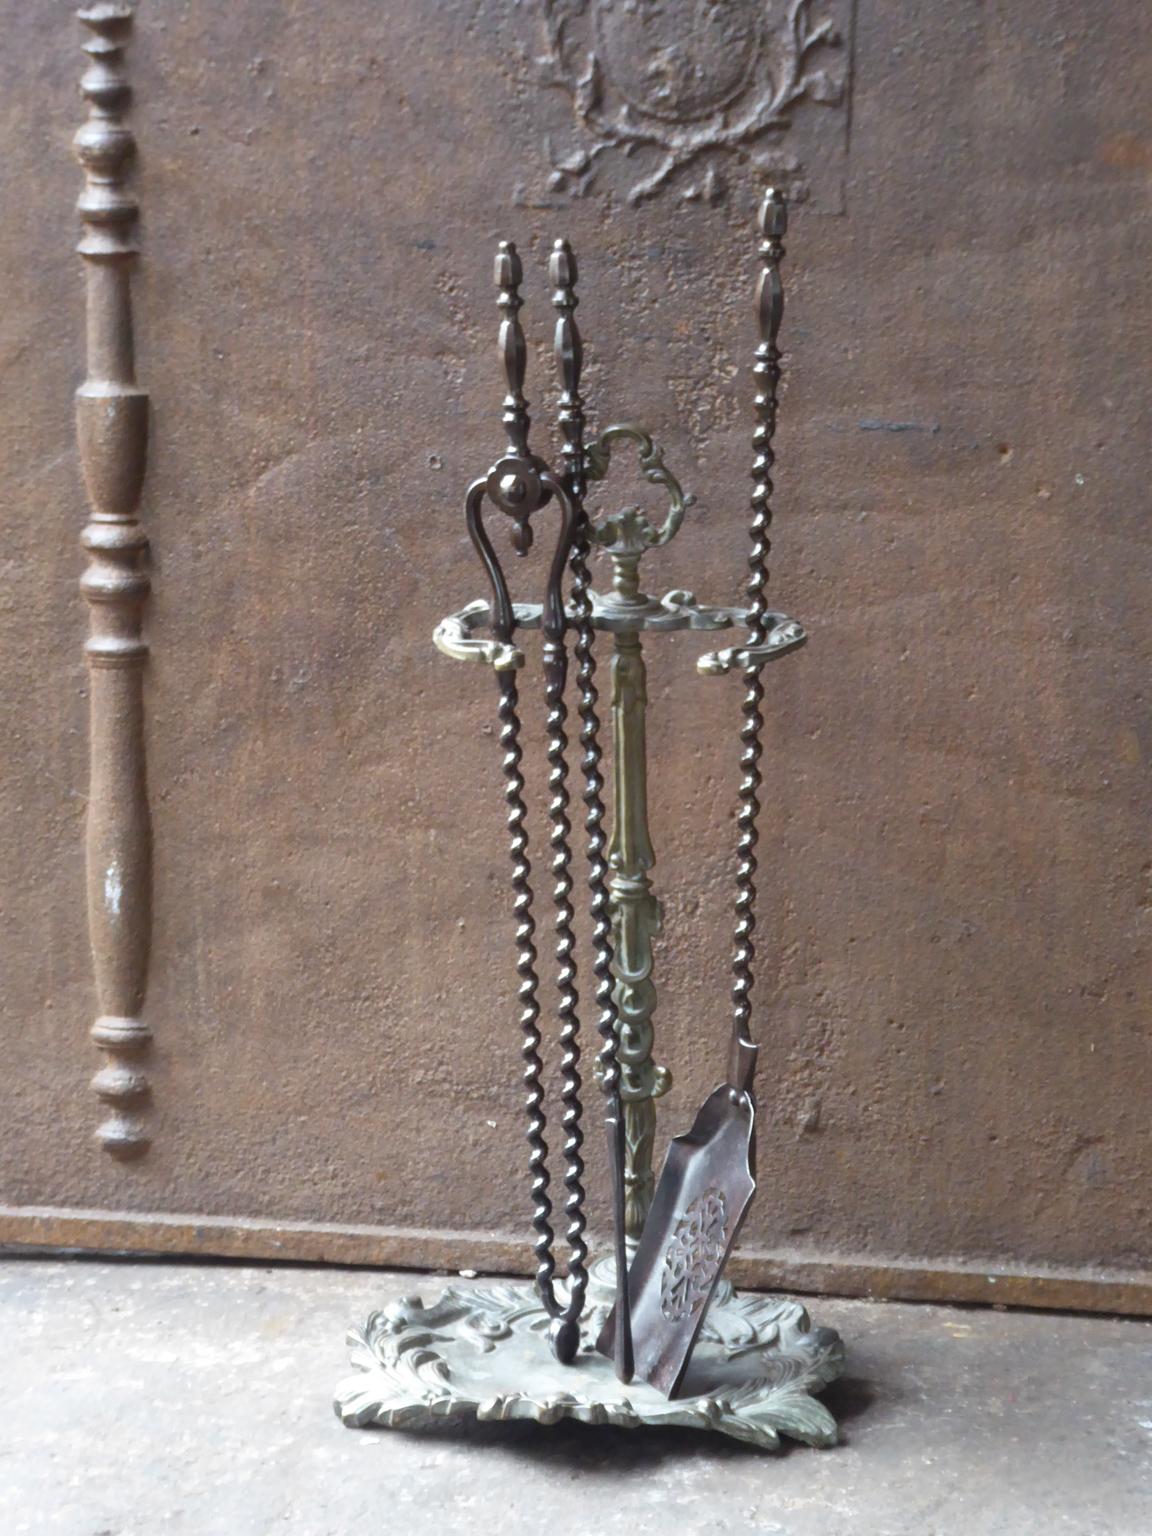 19th century English Victorian fireplace toolset made of brass and wrought iron. The toolset consists of three tools and a stand. The condition is good.













 